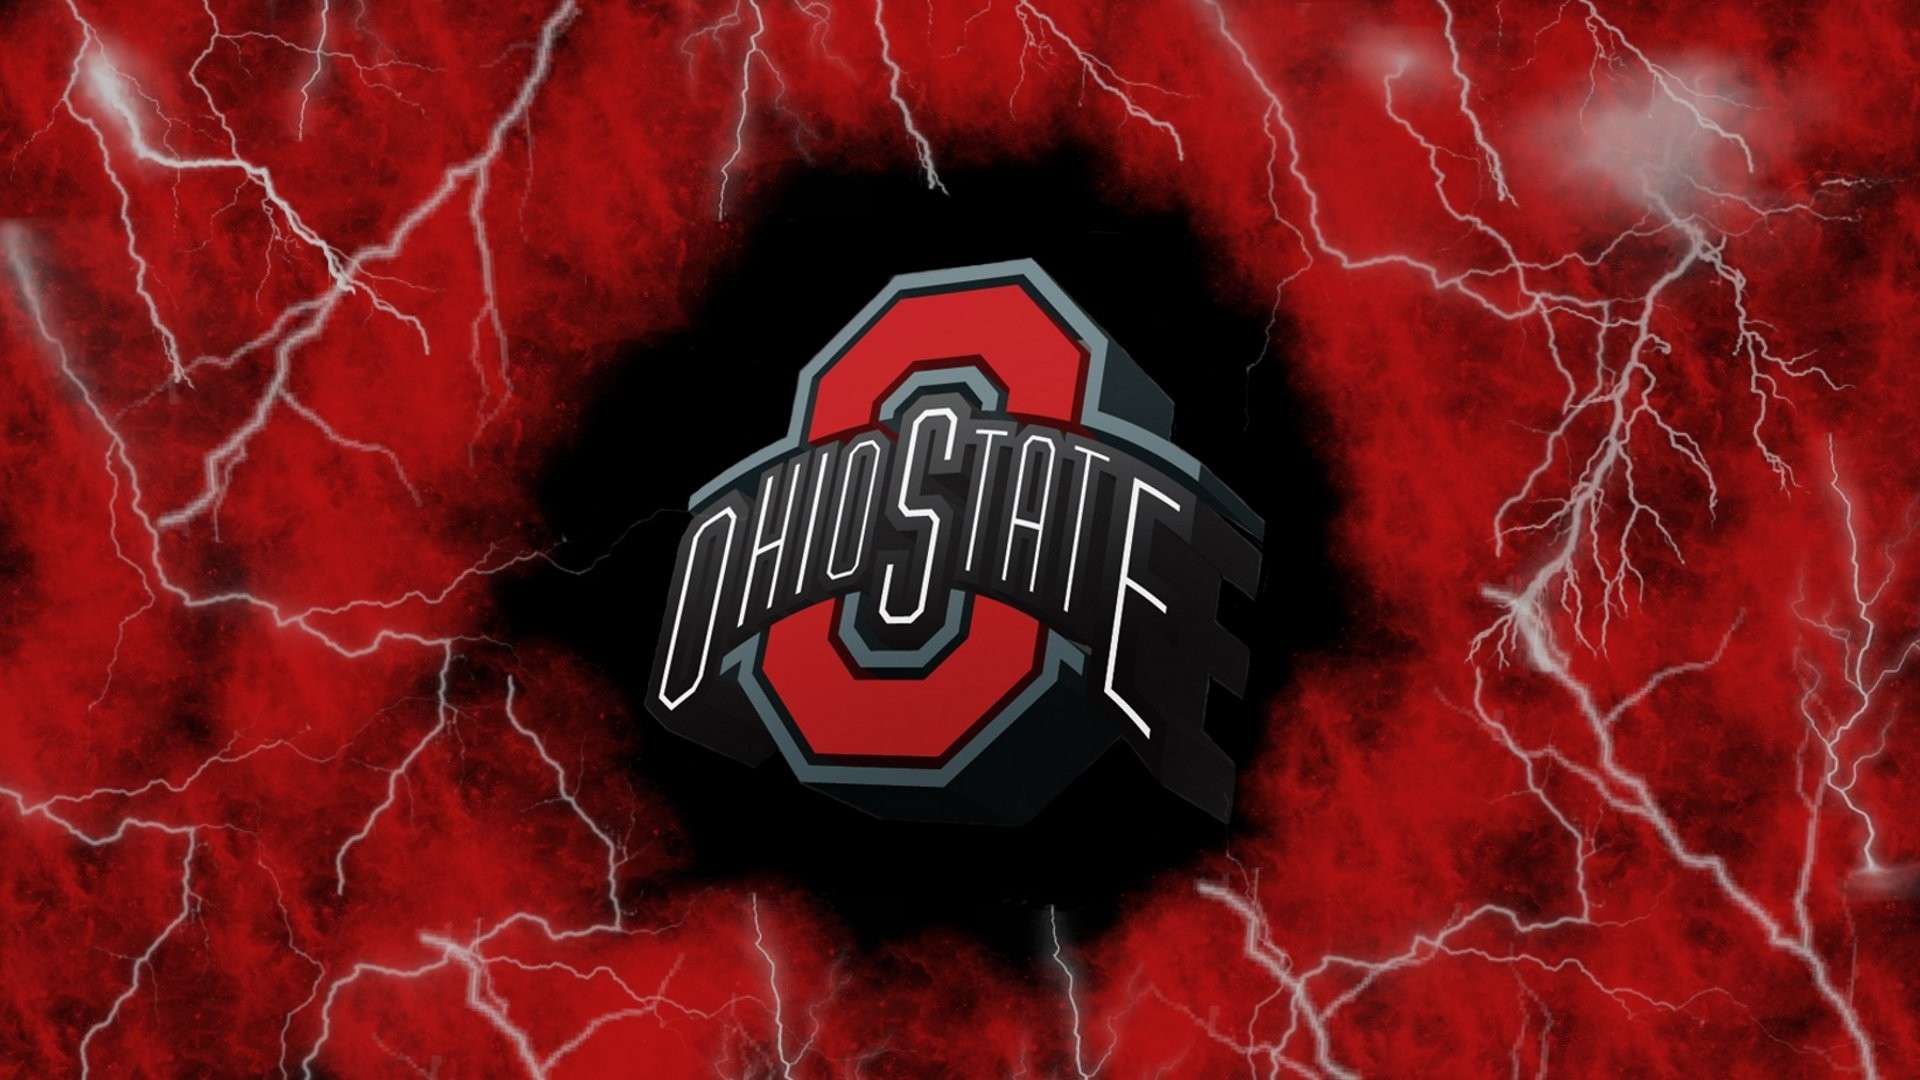 1920x1080 Title : ohio state downloads for every buckeyes fan – brand thunder.  Dimension : 1920 x 1080. File Type : JPG/JPEG